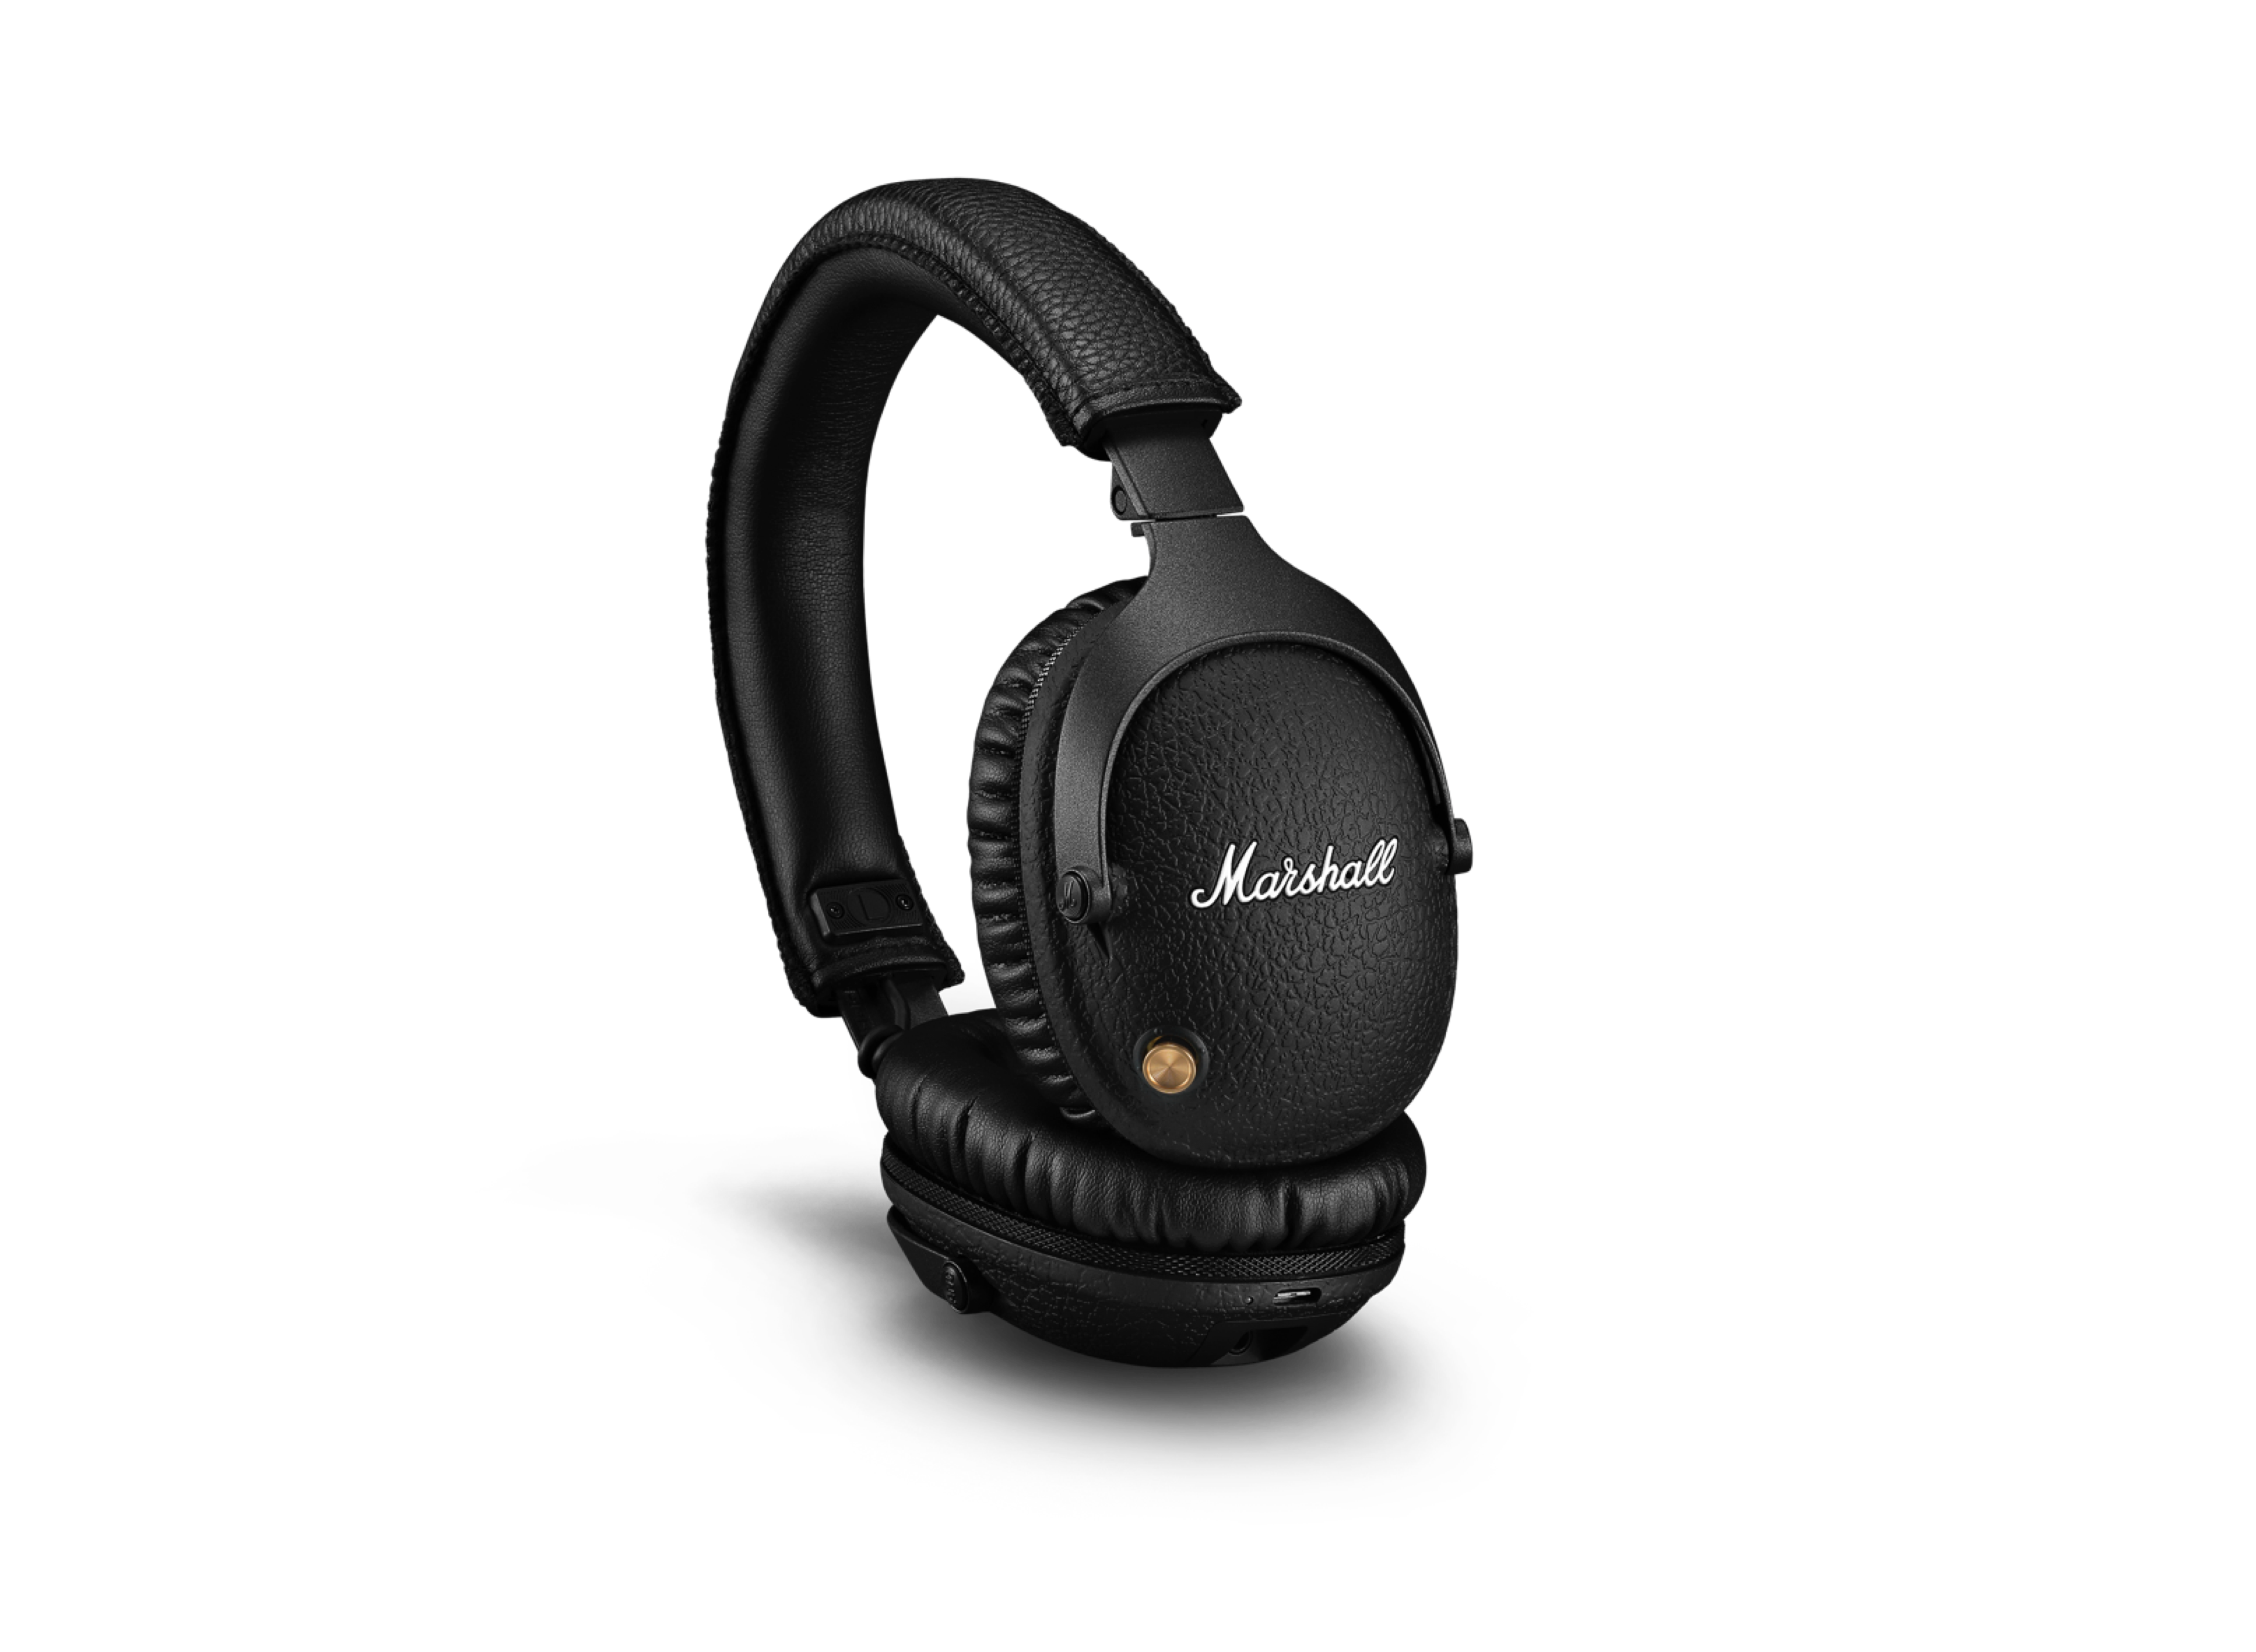 Marshall Monitor Collapsible Headphone Black Over Ear Detachable Cable Mic 